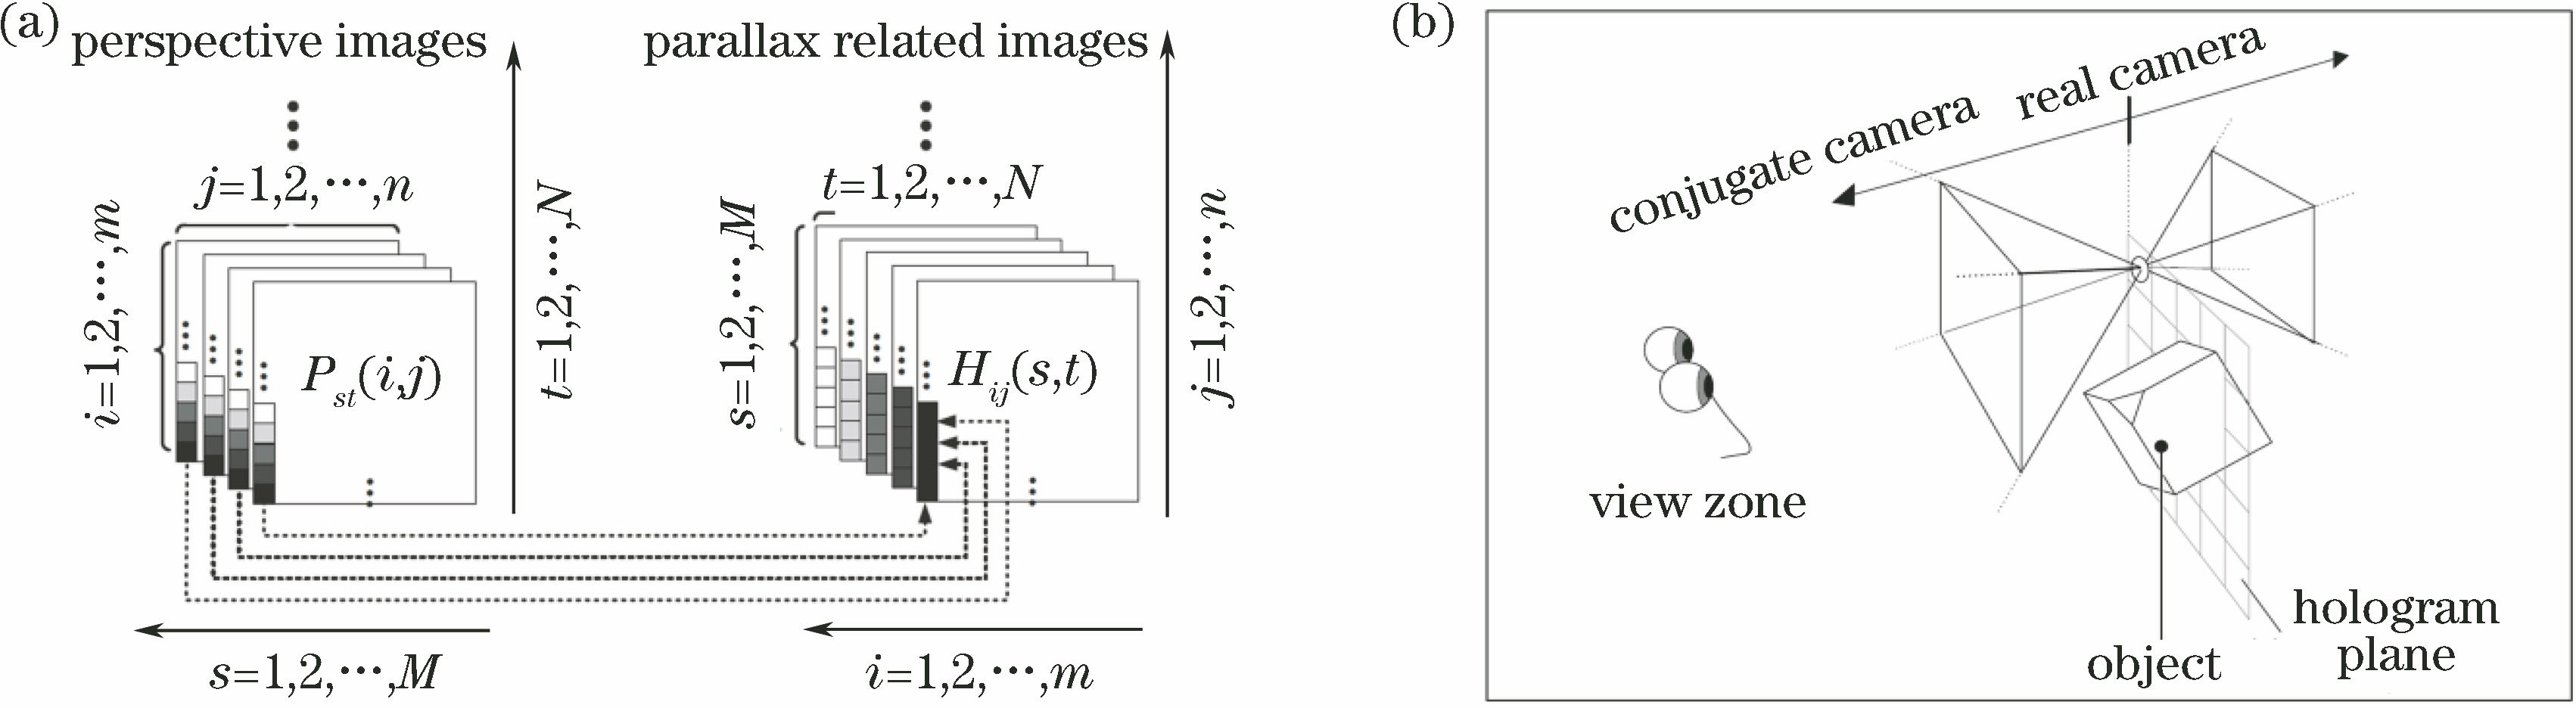 Holographic stereogram of ultragram. (a) Rearranged perspective image of full parallax holographic stereogram with infinite camera; (b) principle of double-cone sampling method